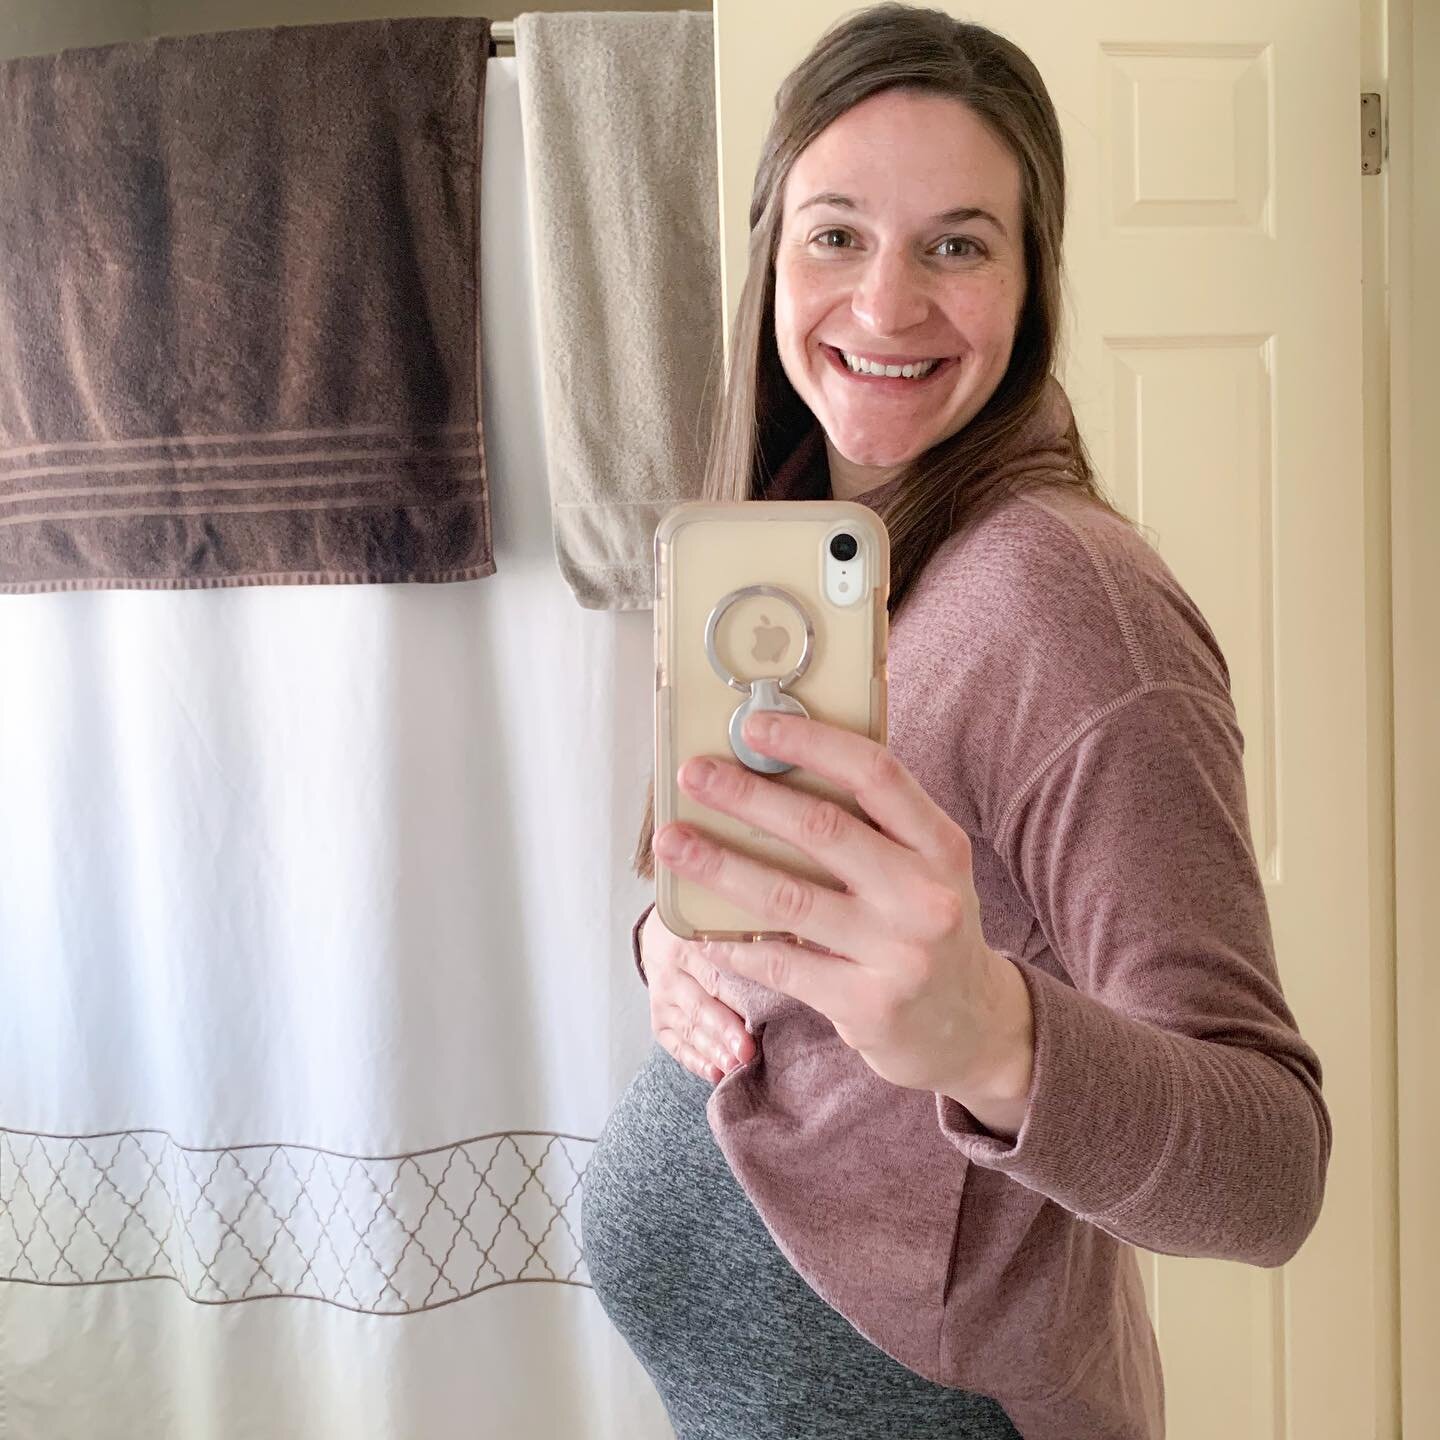 One minute we are loving up on the pregnant belly - then almost immediately after birth, it&rsquo;s like we try to hide any evidence of what the body just did. ⁣
⁣
Grew, developed, and nurtured a baby! Another human! ⁣
⁣
We quickly try to hid